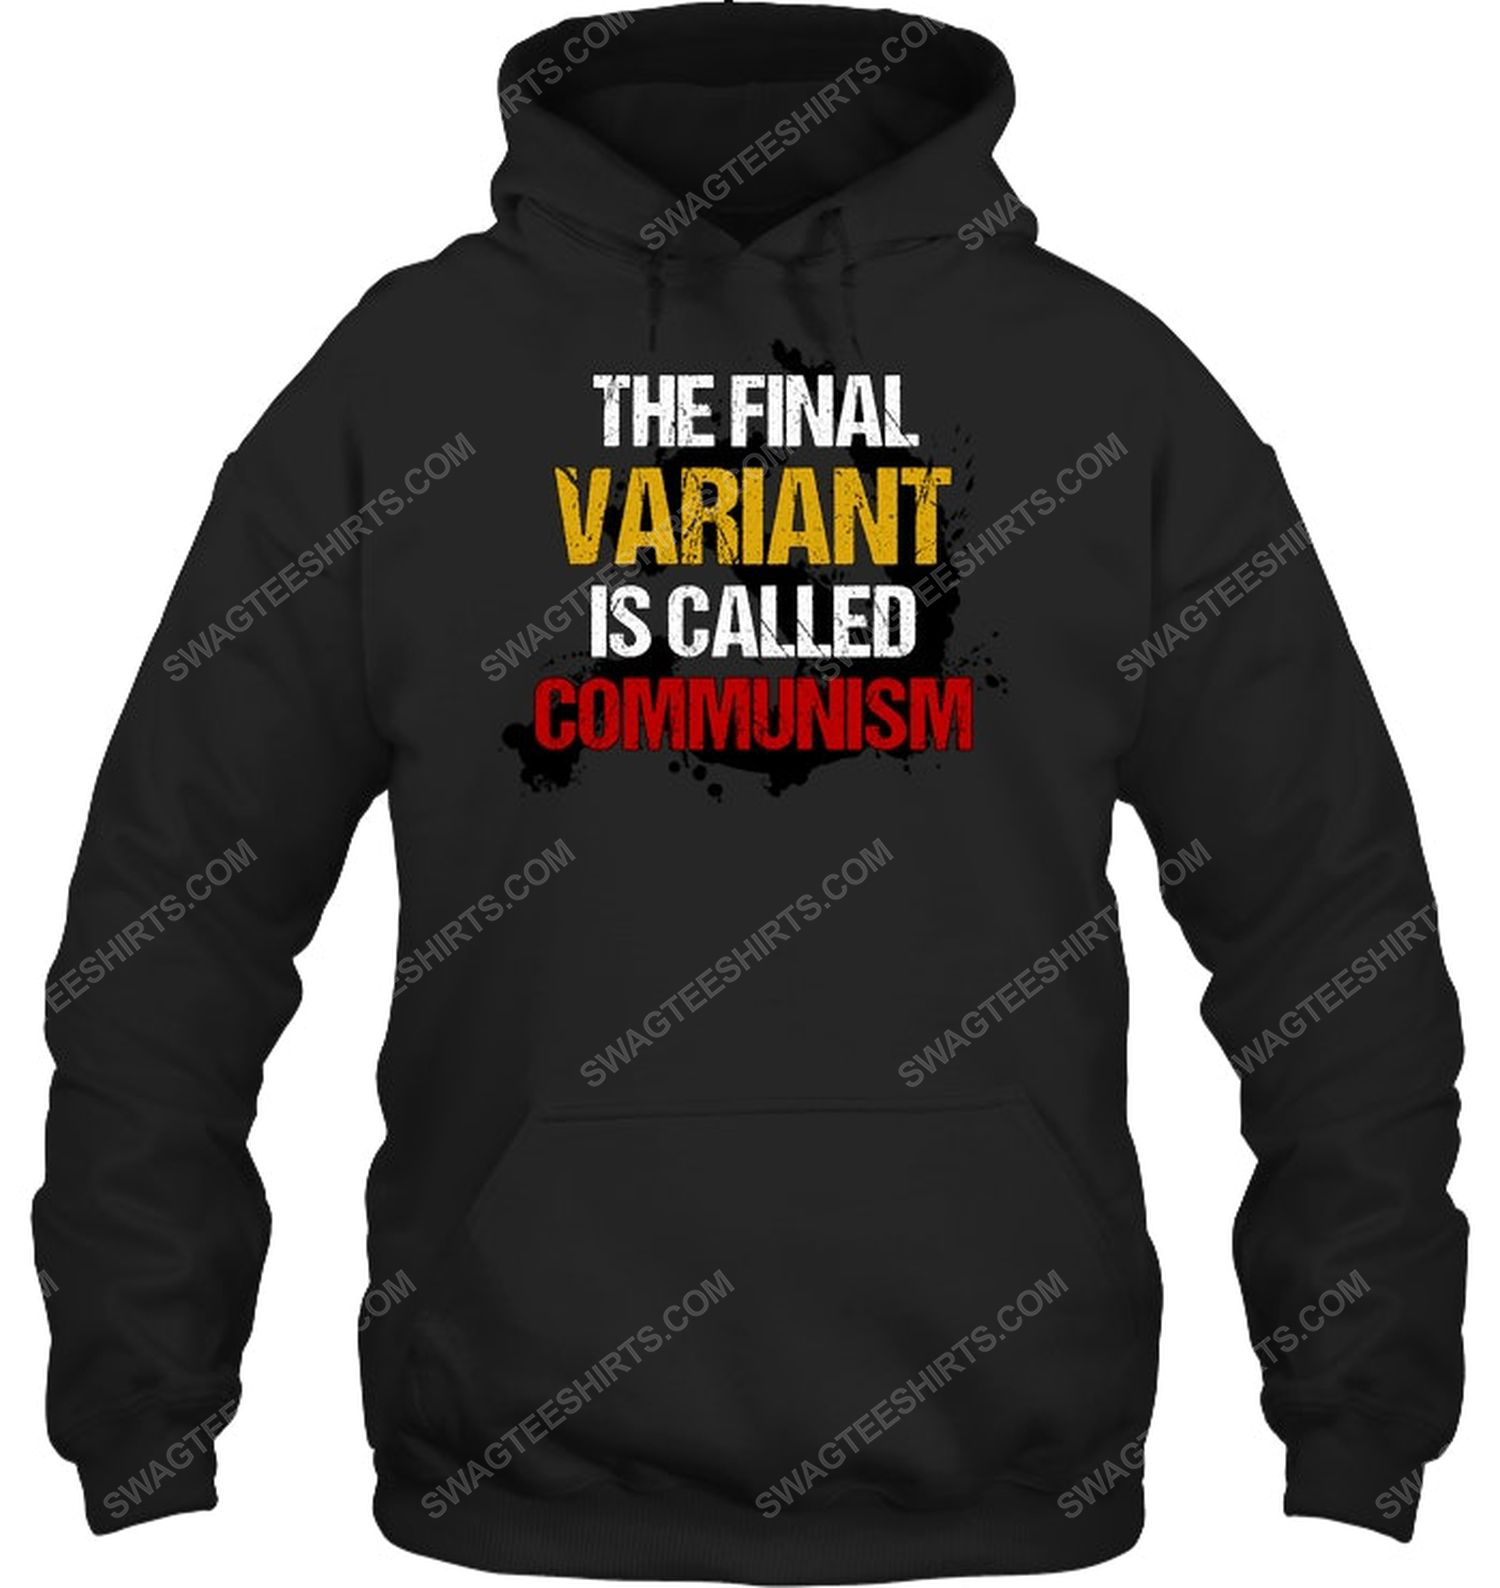 The final variant is called communism political hoodie